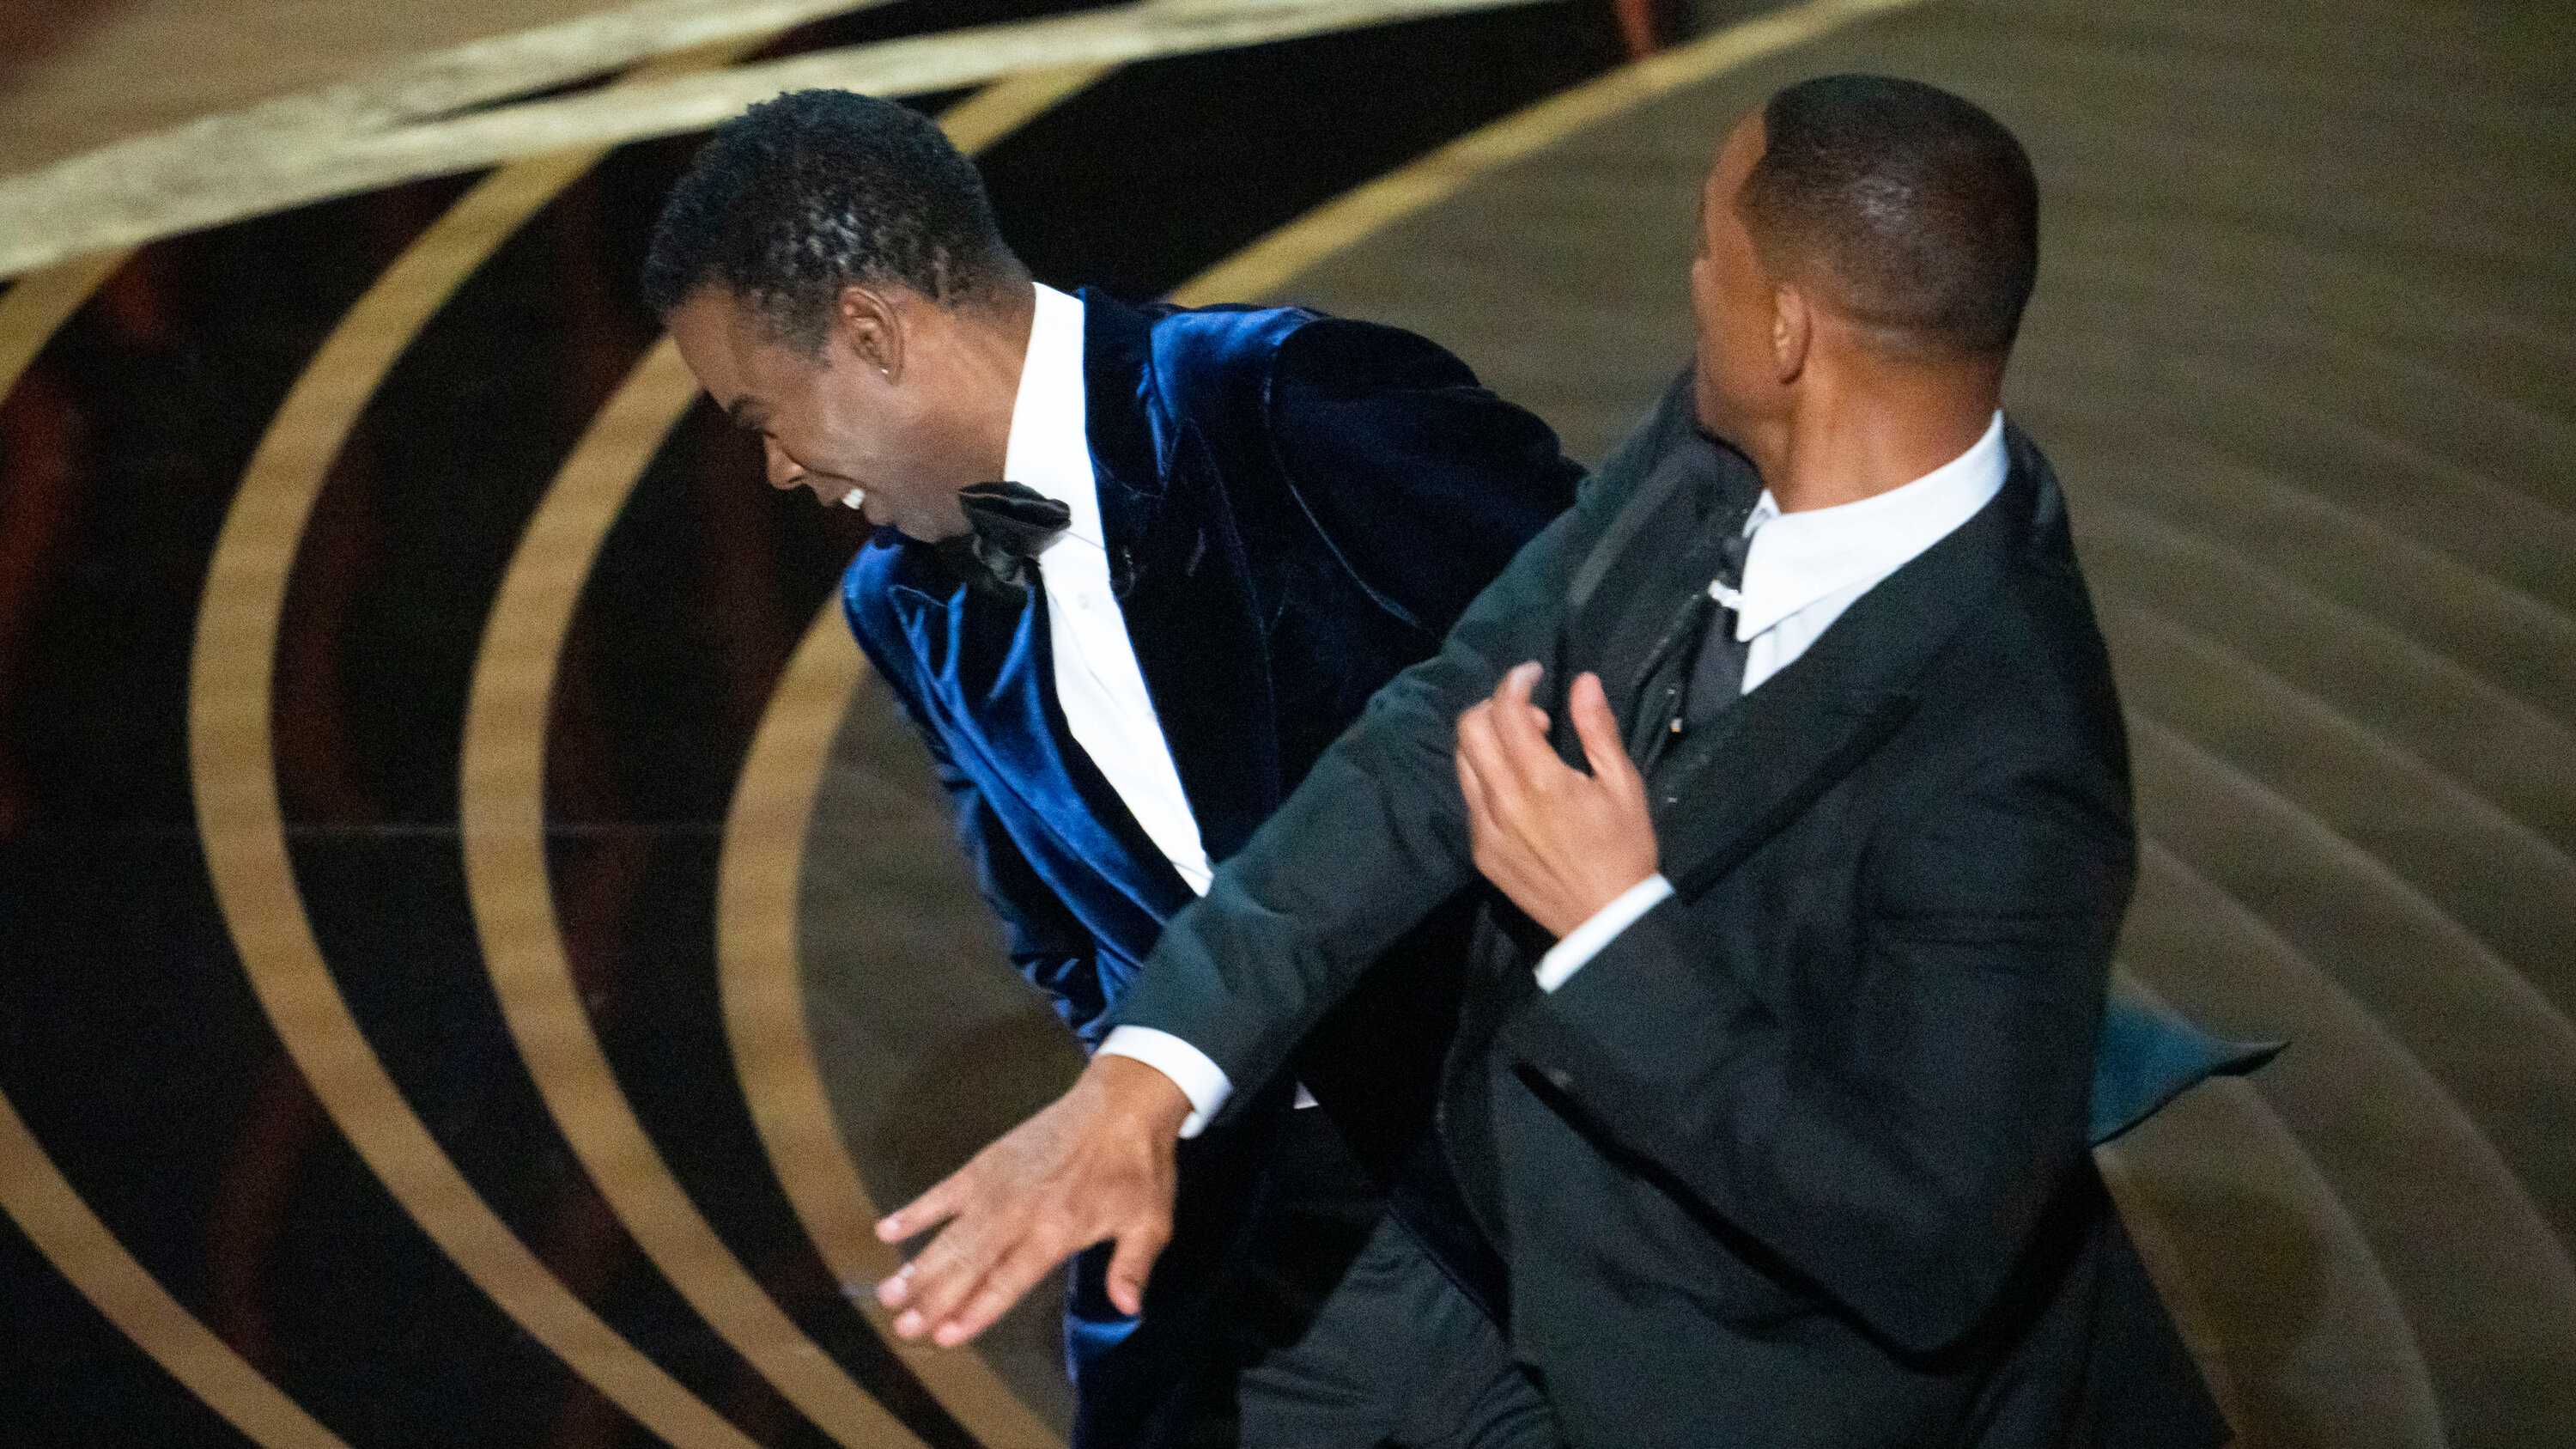 Chris Rock and Will Smith (Source: The New York Times)